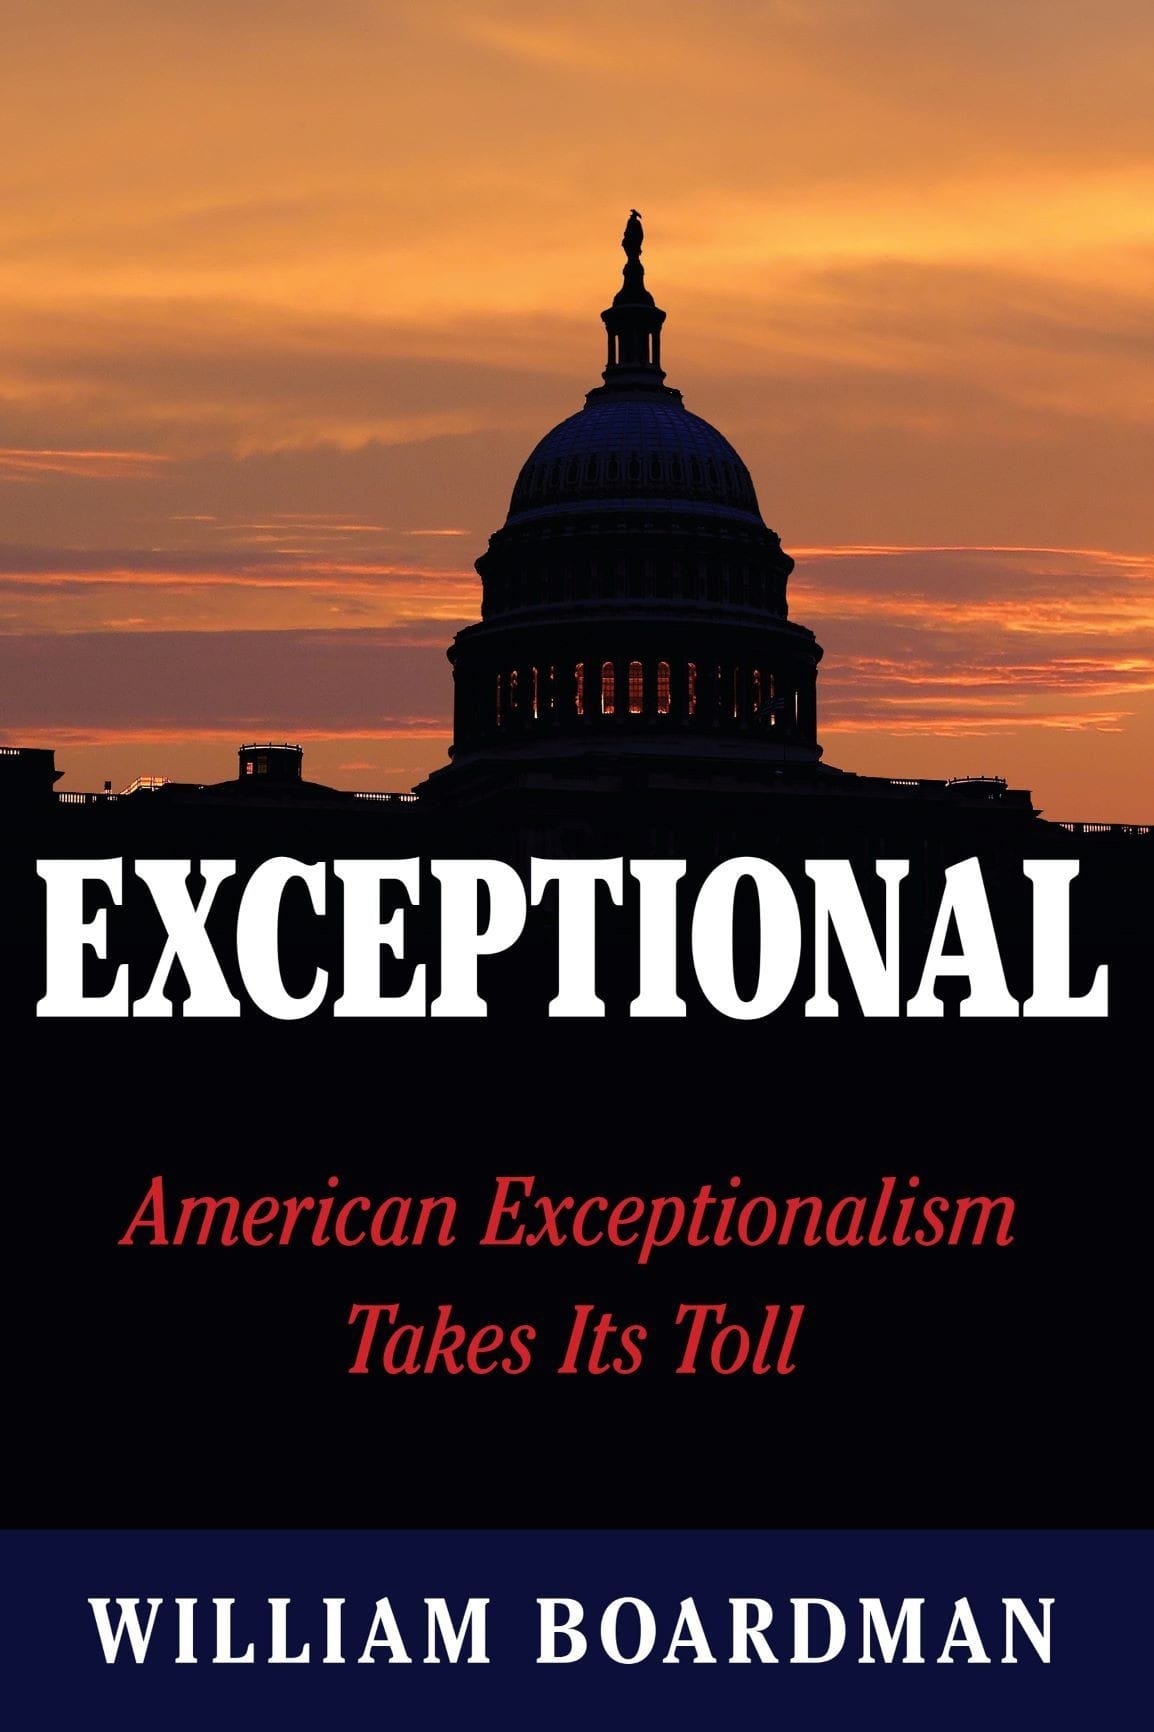 Exceptional: American Exceptionalism Takes Its Toll by William Boardman